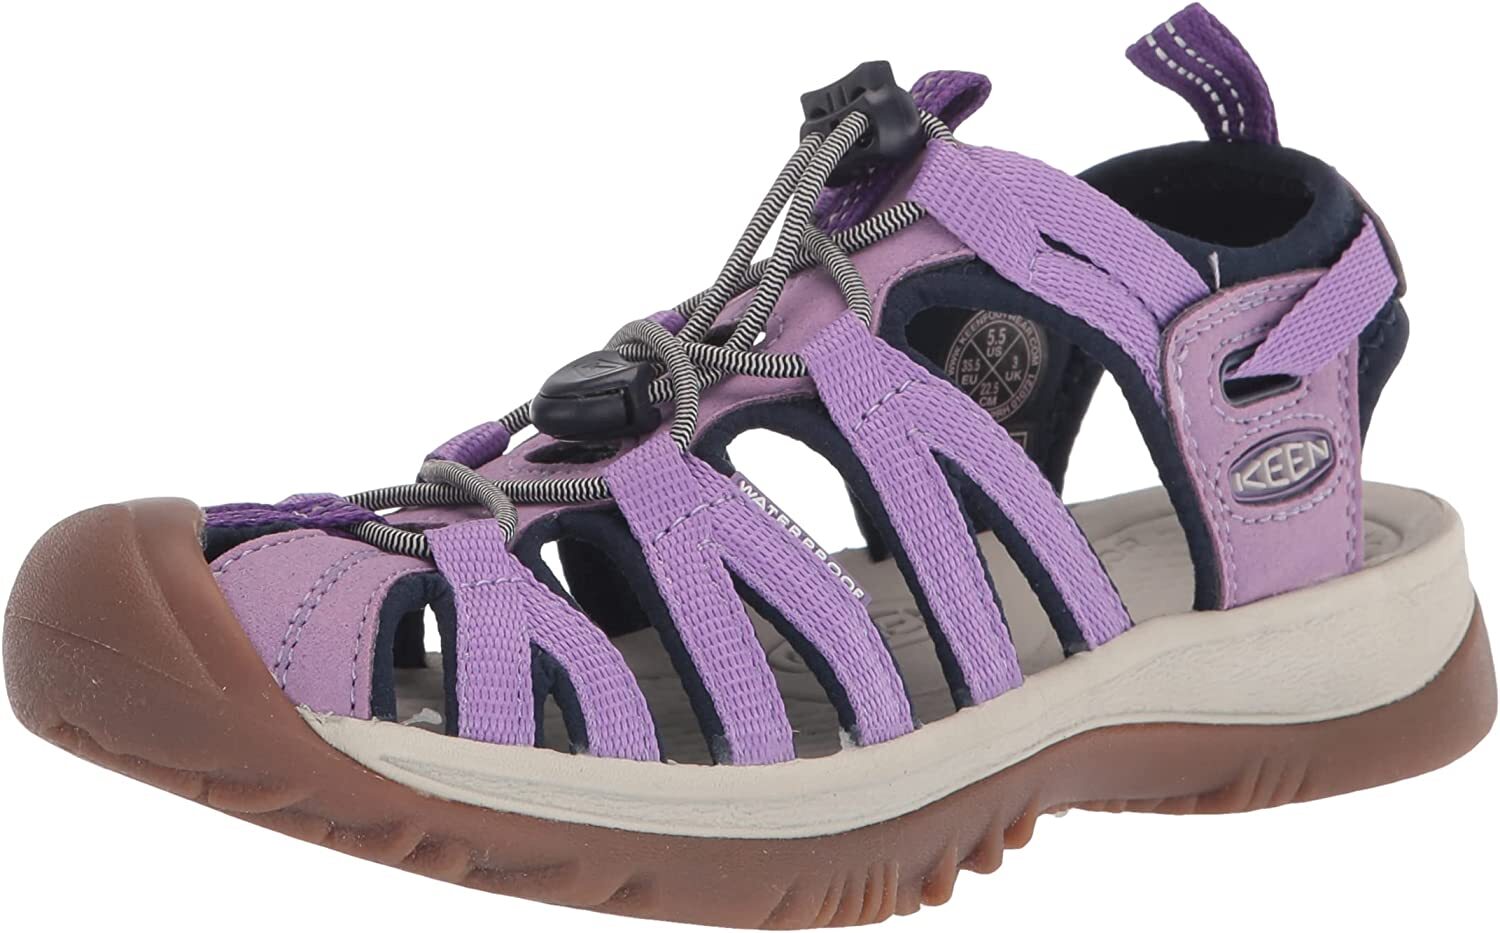 Close-up of a single purple Keen sandal with straps and a protective toe cap